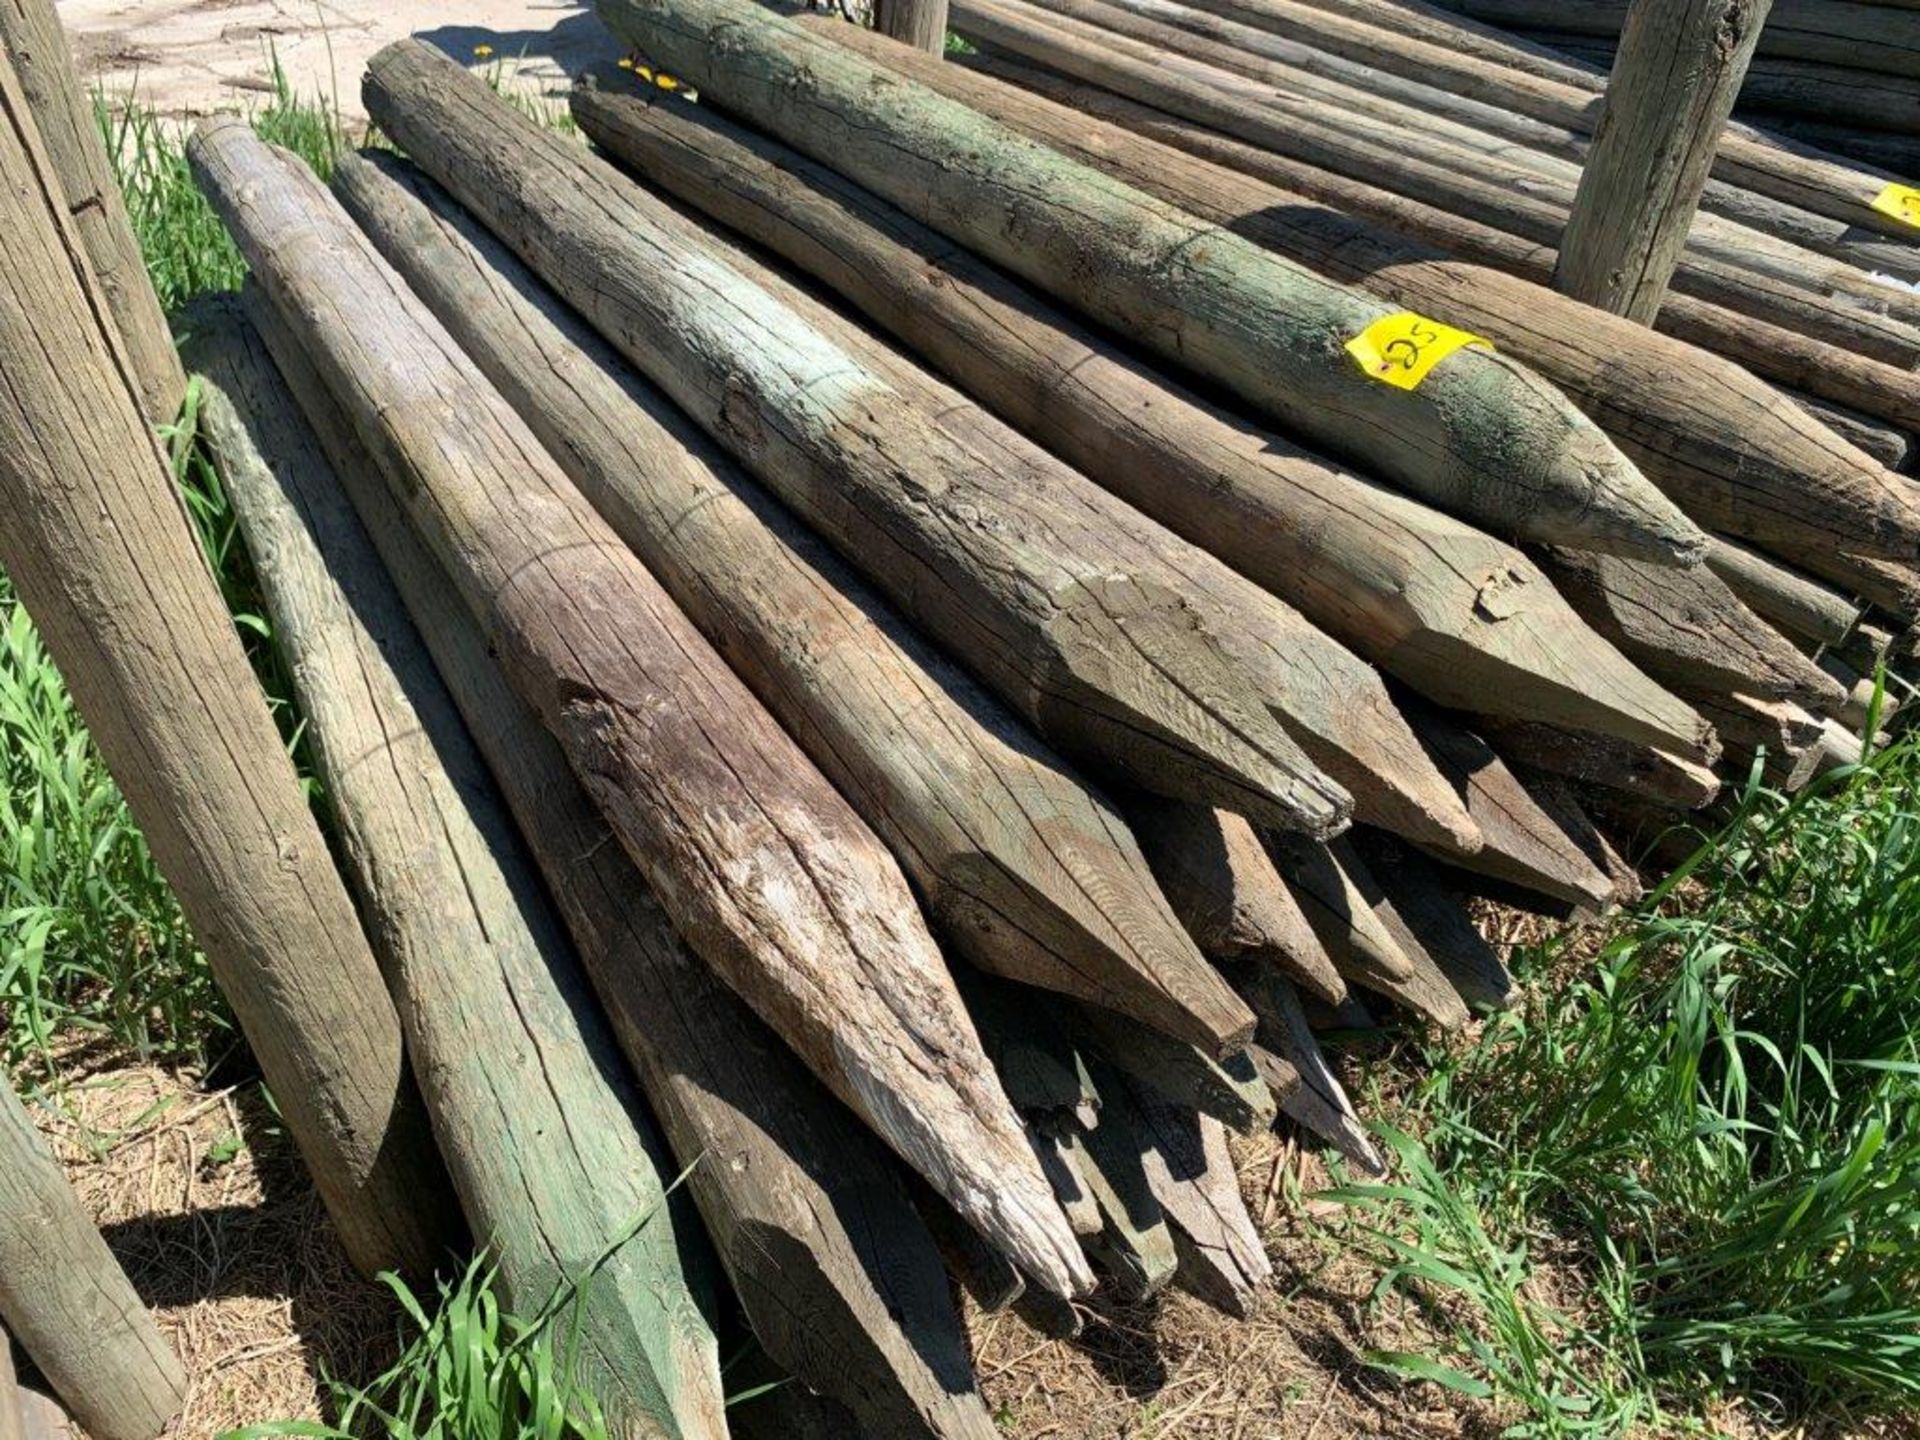 25-17 L/O 5"X6 FT TREATED FENCE POSTS - LOCATED AT VAN STRYLAND FARMS CLIVE CALL CRAIG TO VIEW 403-